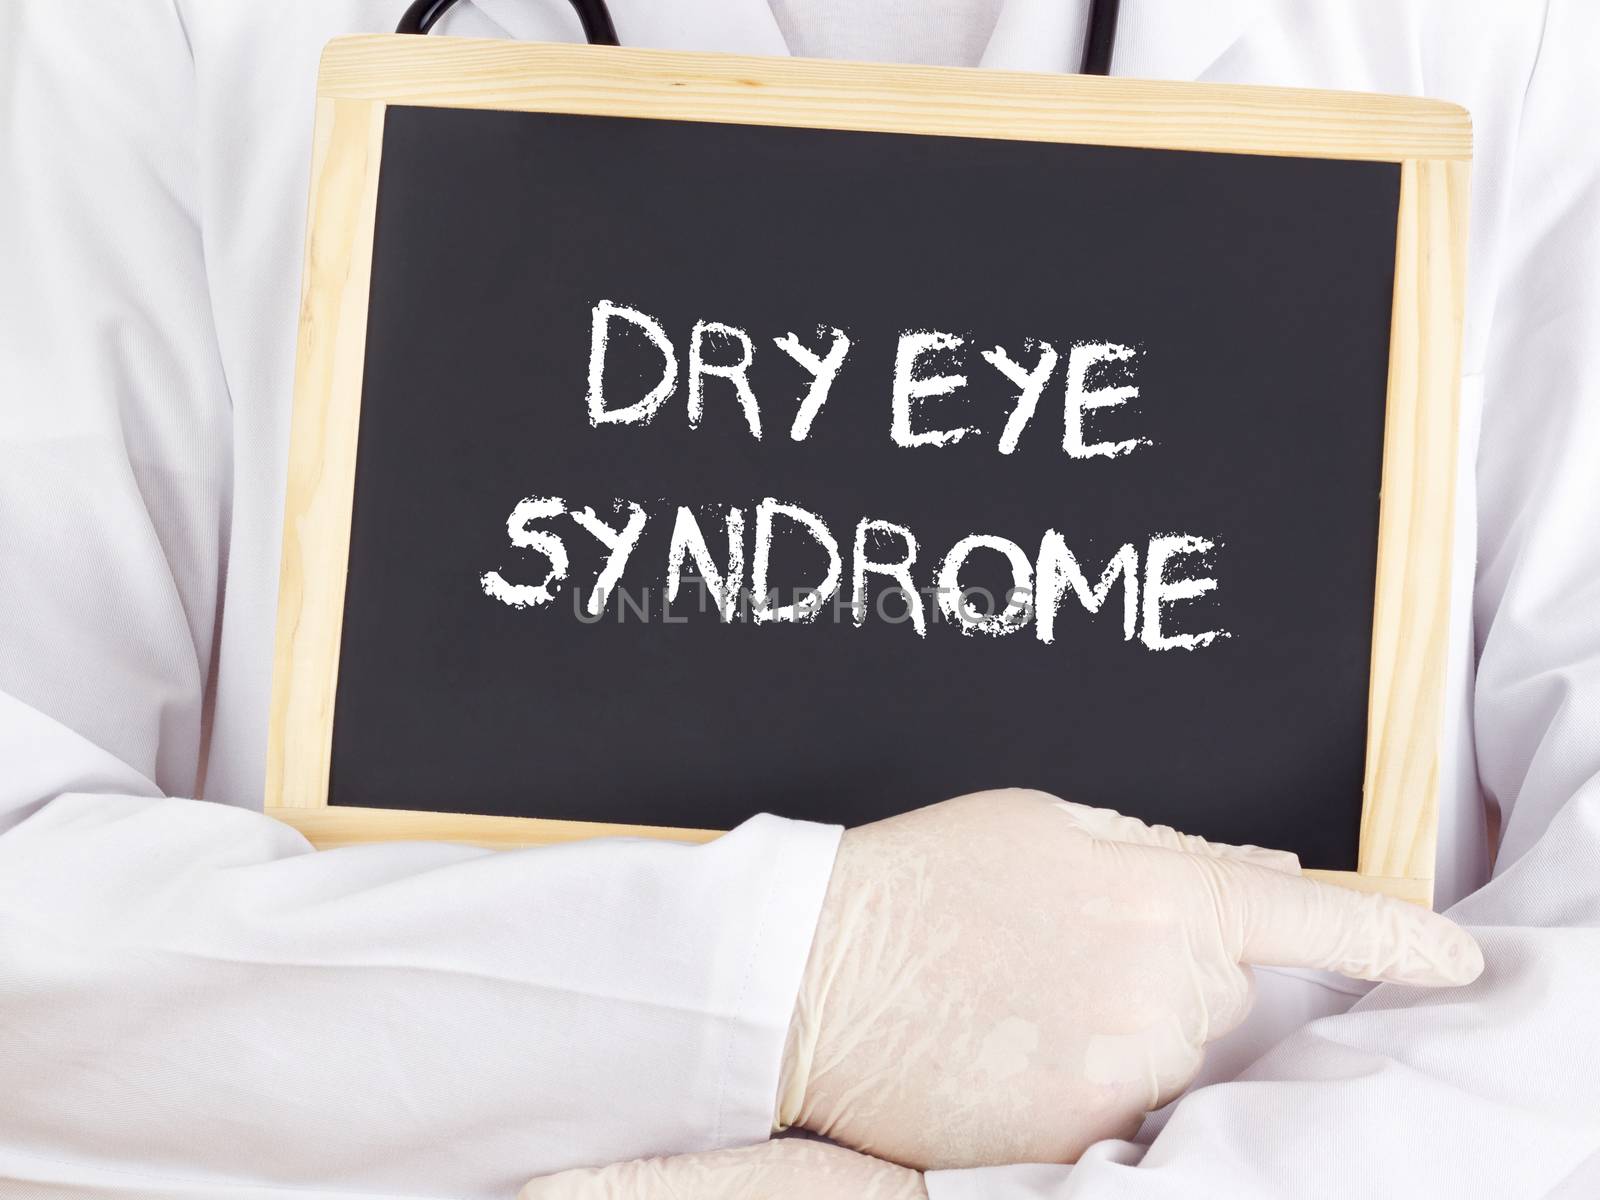 Doctor shows information: dry eye syndrome